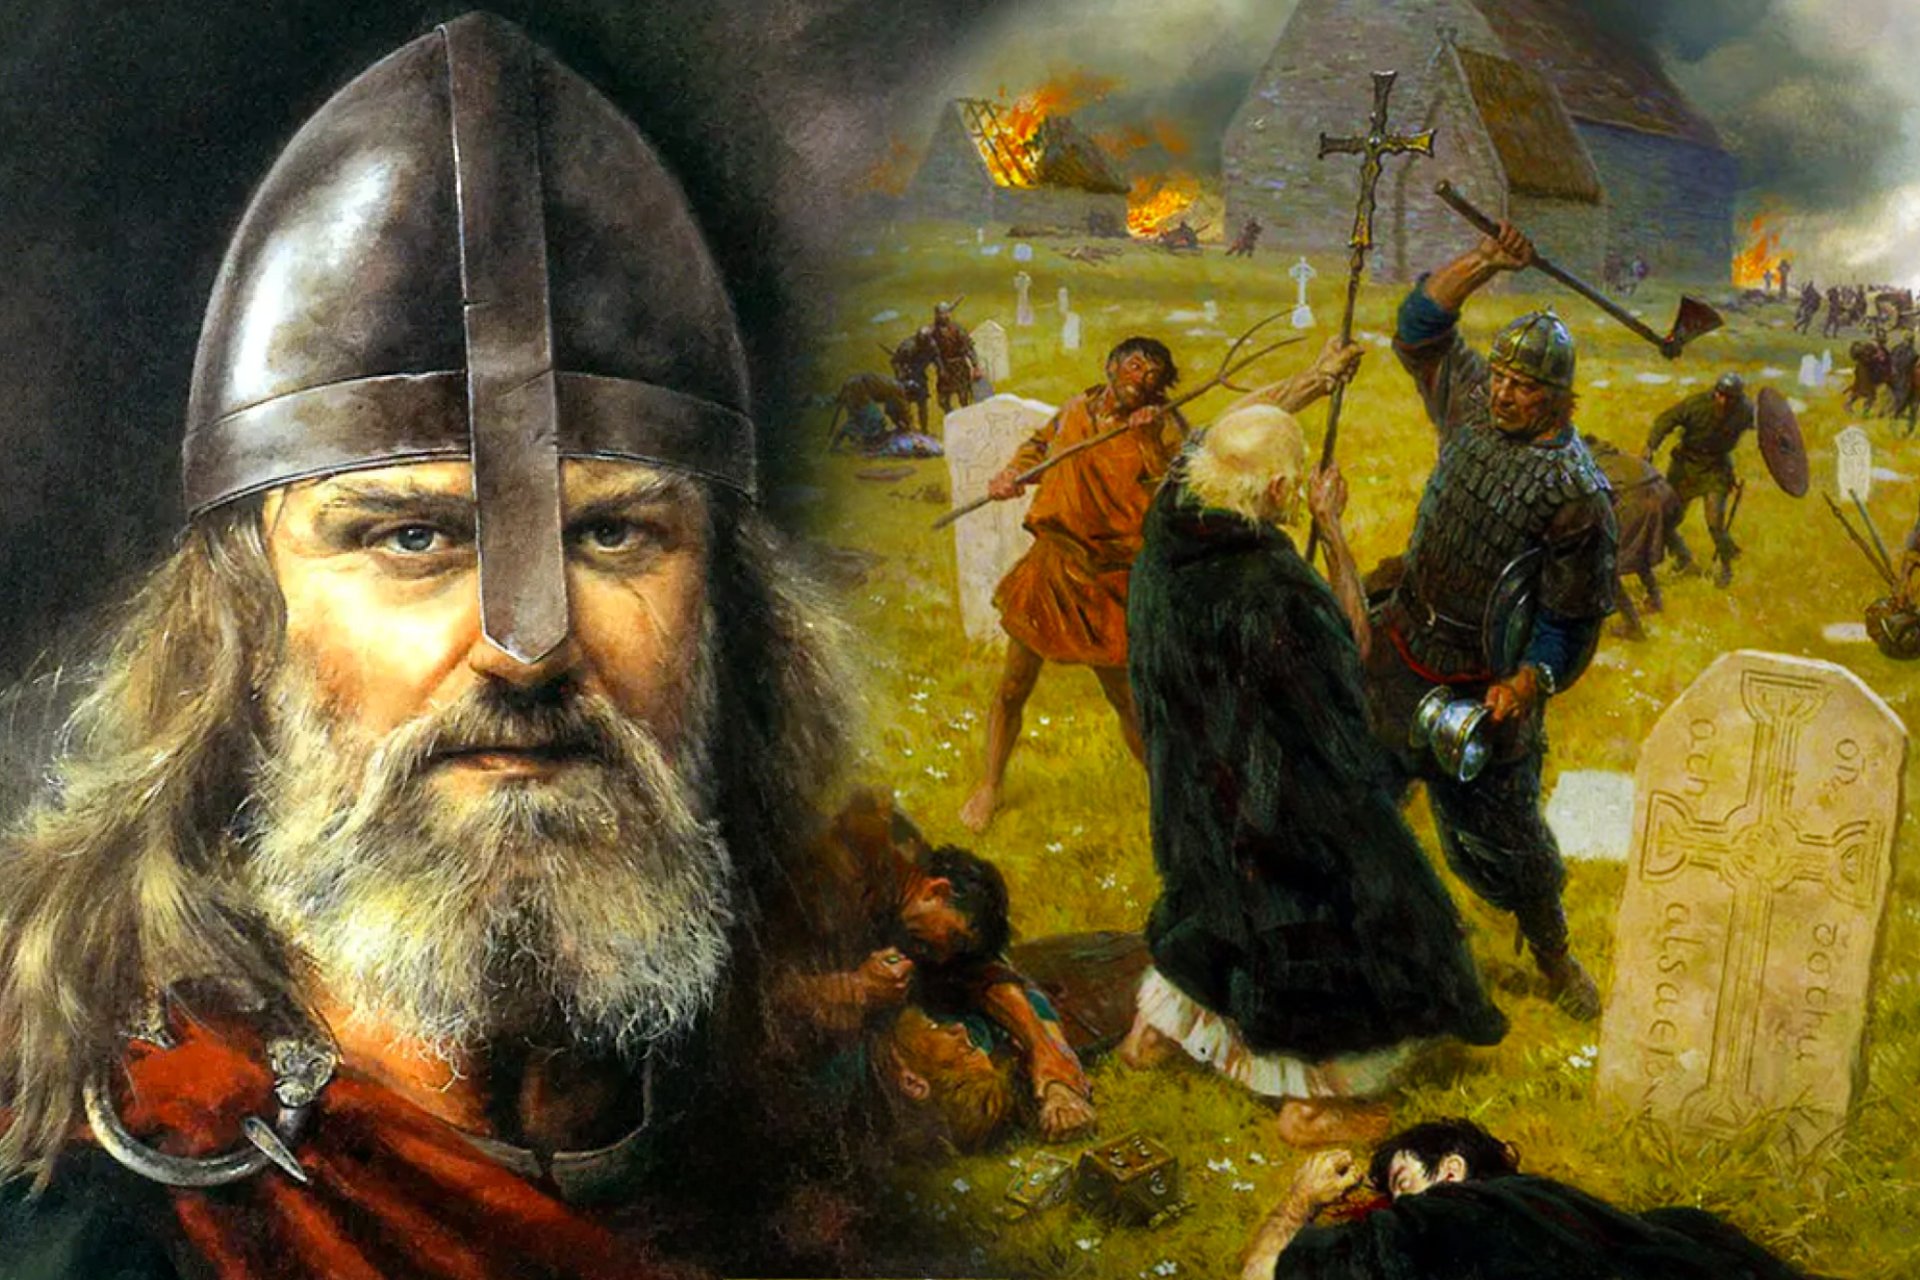 On the left a Viking portrait with long hair and beard, wearing a helmet. On the right, Norse Marauders Wreak Mayhem, depicting a dynamic scene of Viking warriors in action, clad in traditional armor and weapons, causing chaos and disruption in a British village.